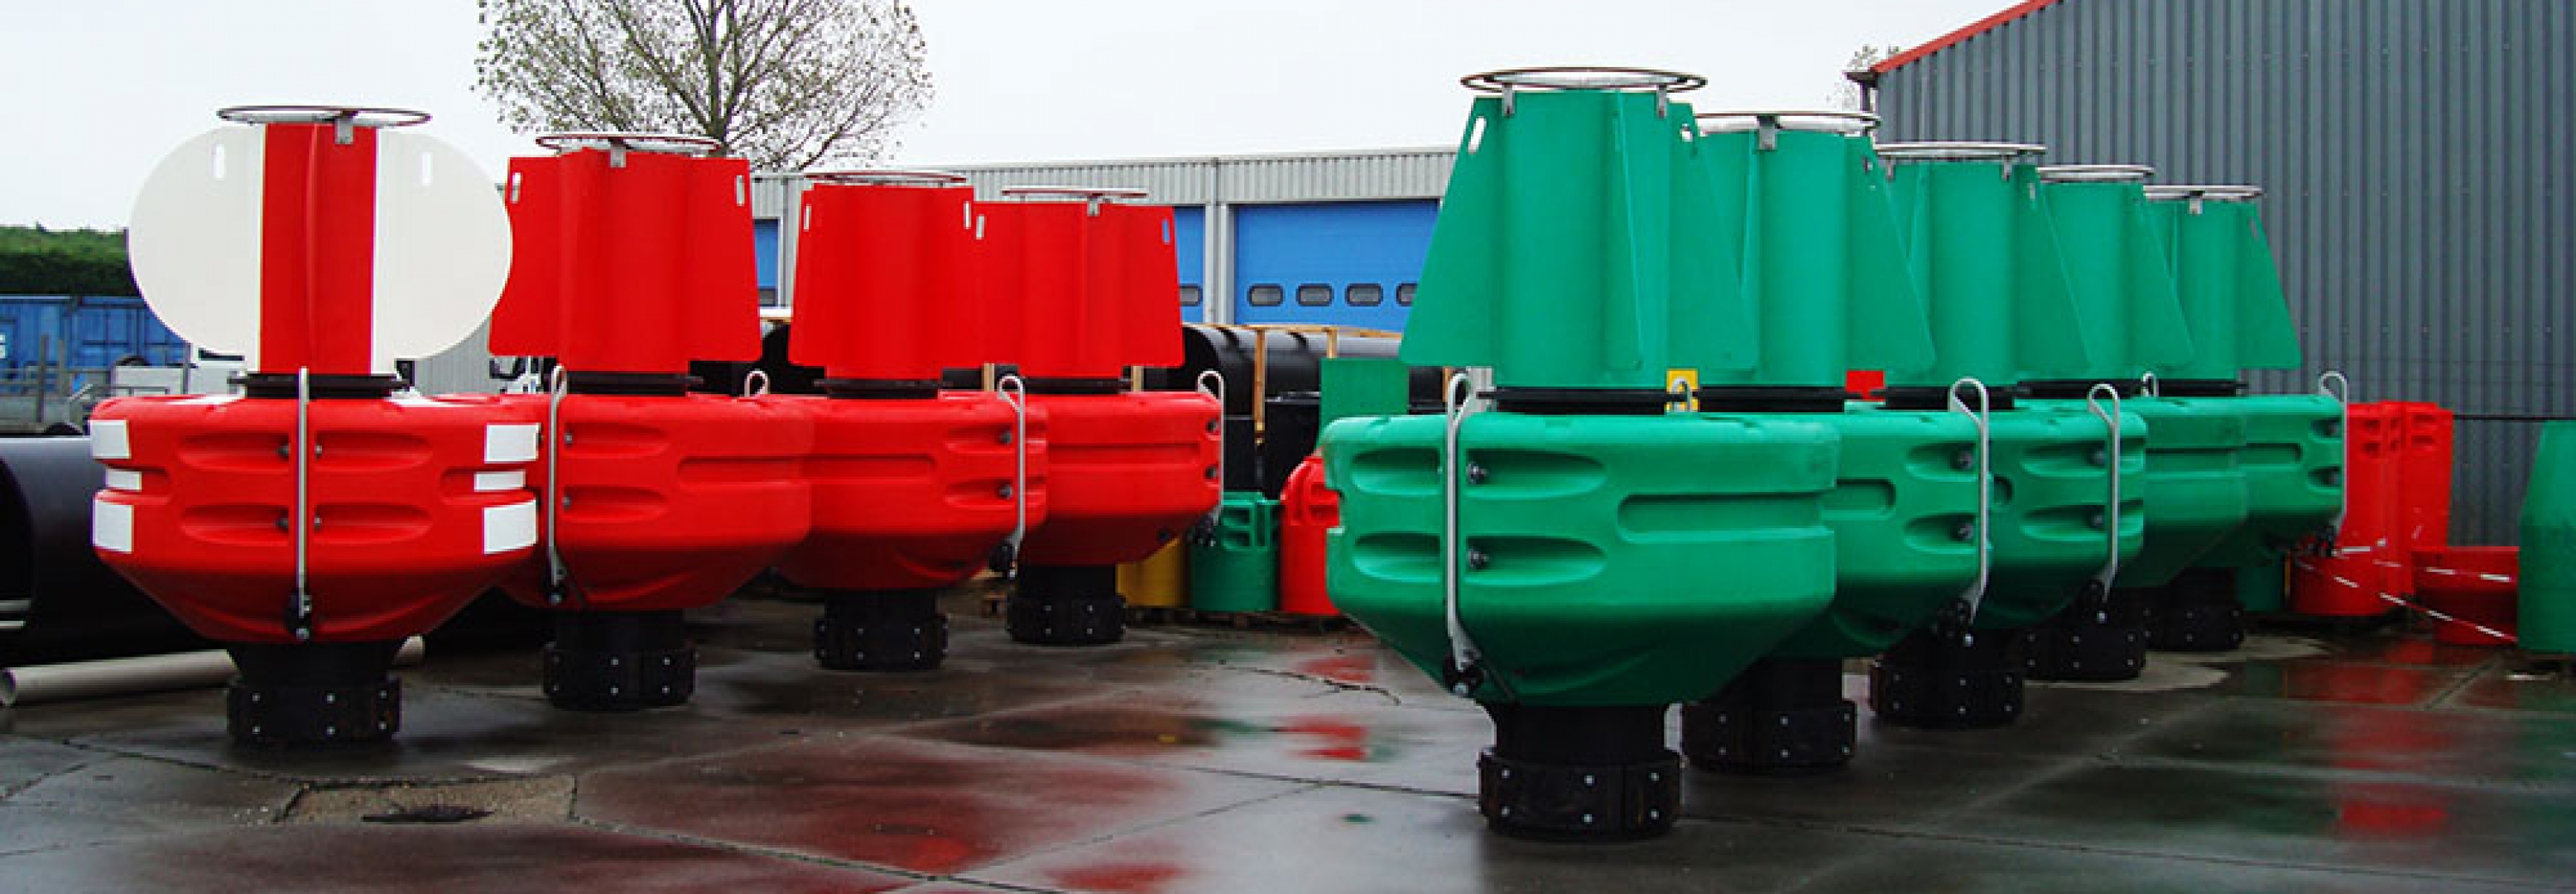 Buoys for the department of Waterways and Public Works